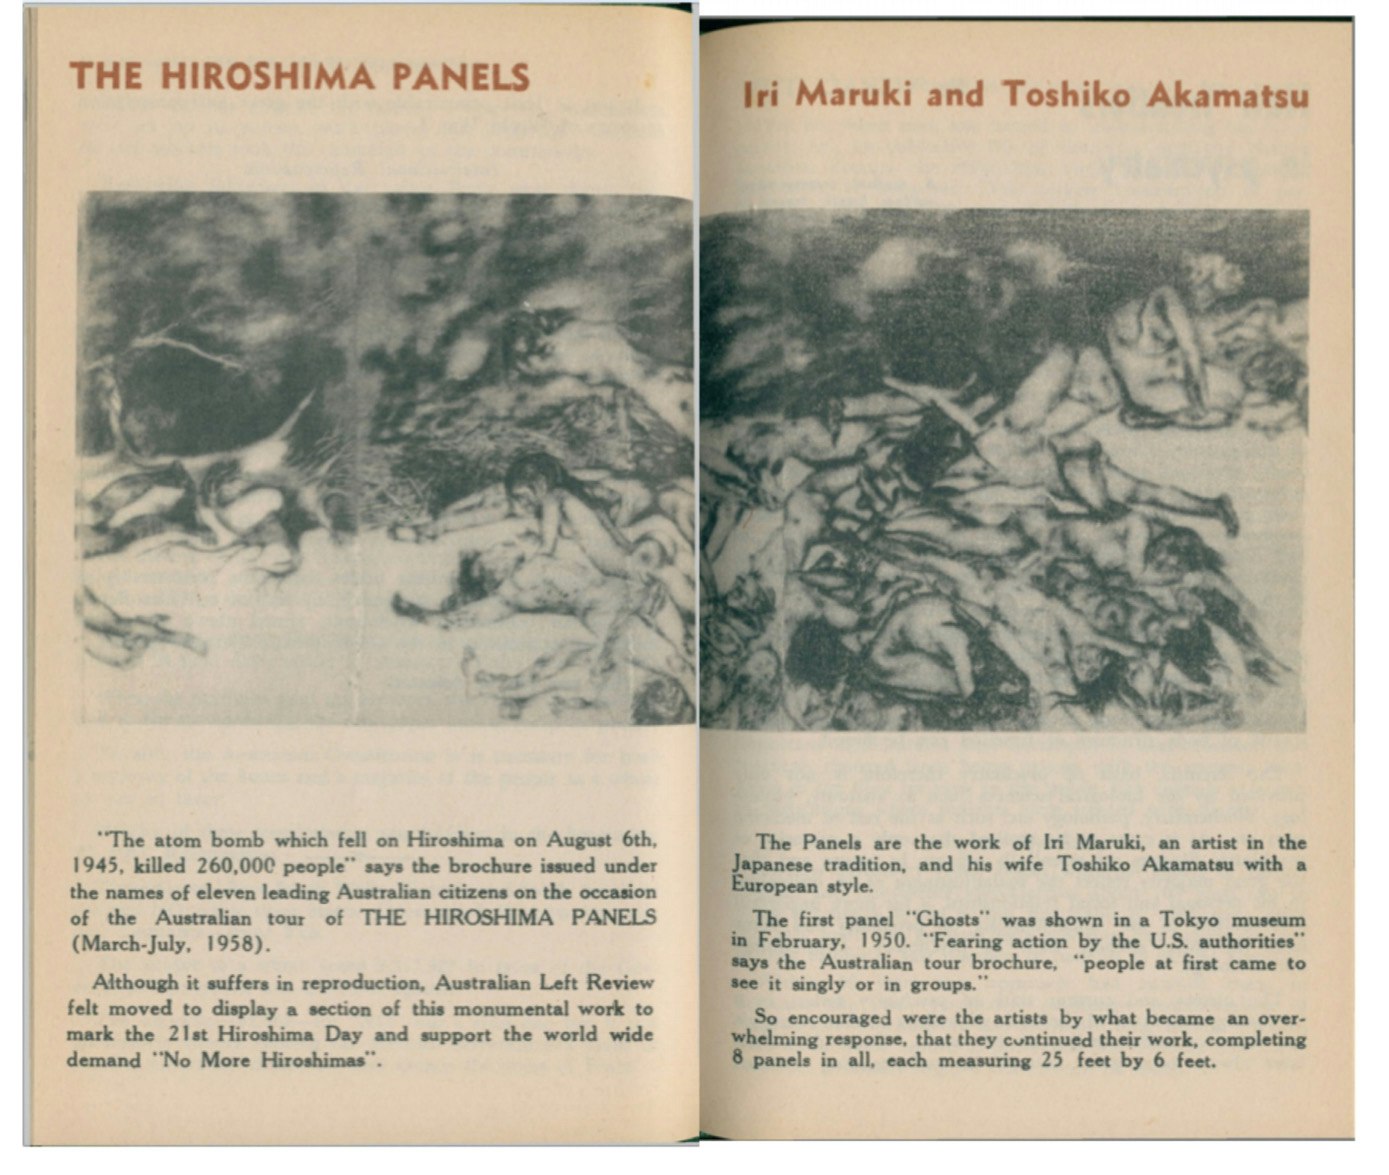 A scan of a double-page spread from a book. The text reads, 'The Hiroshima Panels, Iri Maruki and Toshika Akamatsu.' The body text reads, '"The atom bomb which fell on Hiroshima on August 6th, 1945, killed 260,000 people," says the brochure issued under the names of eleven leading Australian citizens on the occasion of the Australian tour of THE HIROSHIMA PANELS (March-July, 1958). Although it suffers in reproduction, Australian Left Review felt moved to display a section of this monumnetal work to mark the 21st Hiroshima Day and support the world wide demand "No More Hiroshimas." The Panels are the work of Iri Maruki, an artist in the Japanese tradition, and his wife Toshiko Akamatsu with a European style. The first panel "Ghosts" was shown in a Tokyo museum in February, 1950. "Fearing action by the U.S. authorities" says the Australian tour brochure, "people at first came to see it singly or in groups." So encouraged were the artist by what became an overwhelming response, that they continued their work, completing 8 panels in all, each measuring 25 feet by 6 feet.'